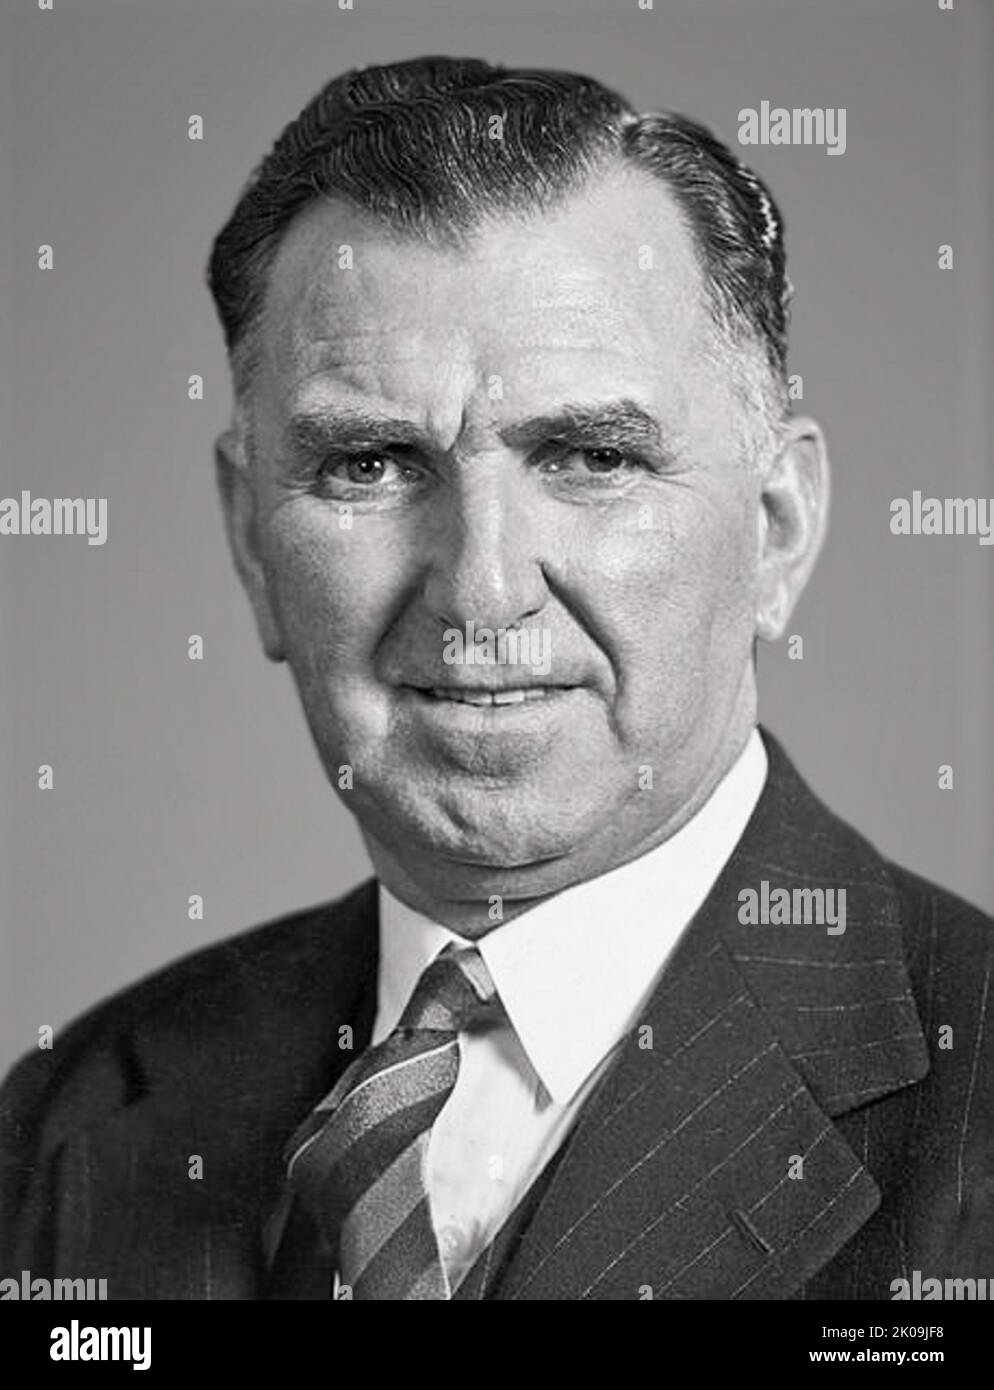 Sir Sidney Holland (1893 - 1961) New Zealand politician who served as the 25th prime minister of New Zealand from 13 December 1949 to 20 September 1957. He was instrumental in the creation and consolidation of the New Zealand National Party, which was to dominate New Zealand politics for much of the second half of the 20th century. Stock Photo